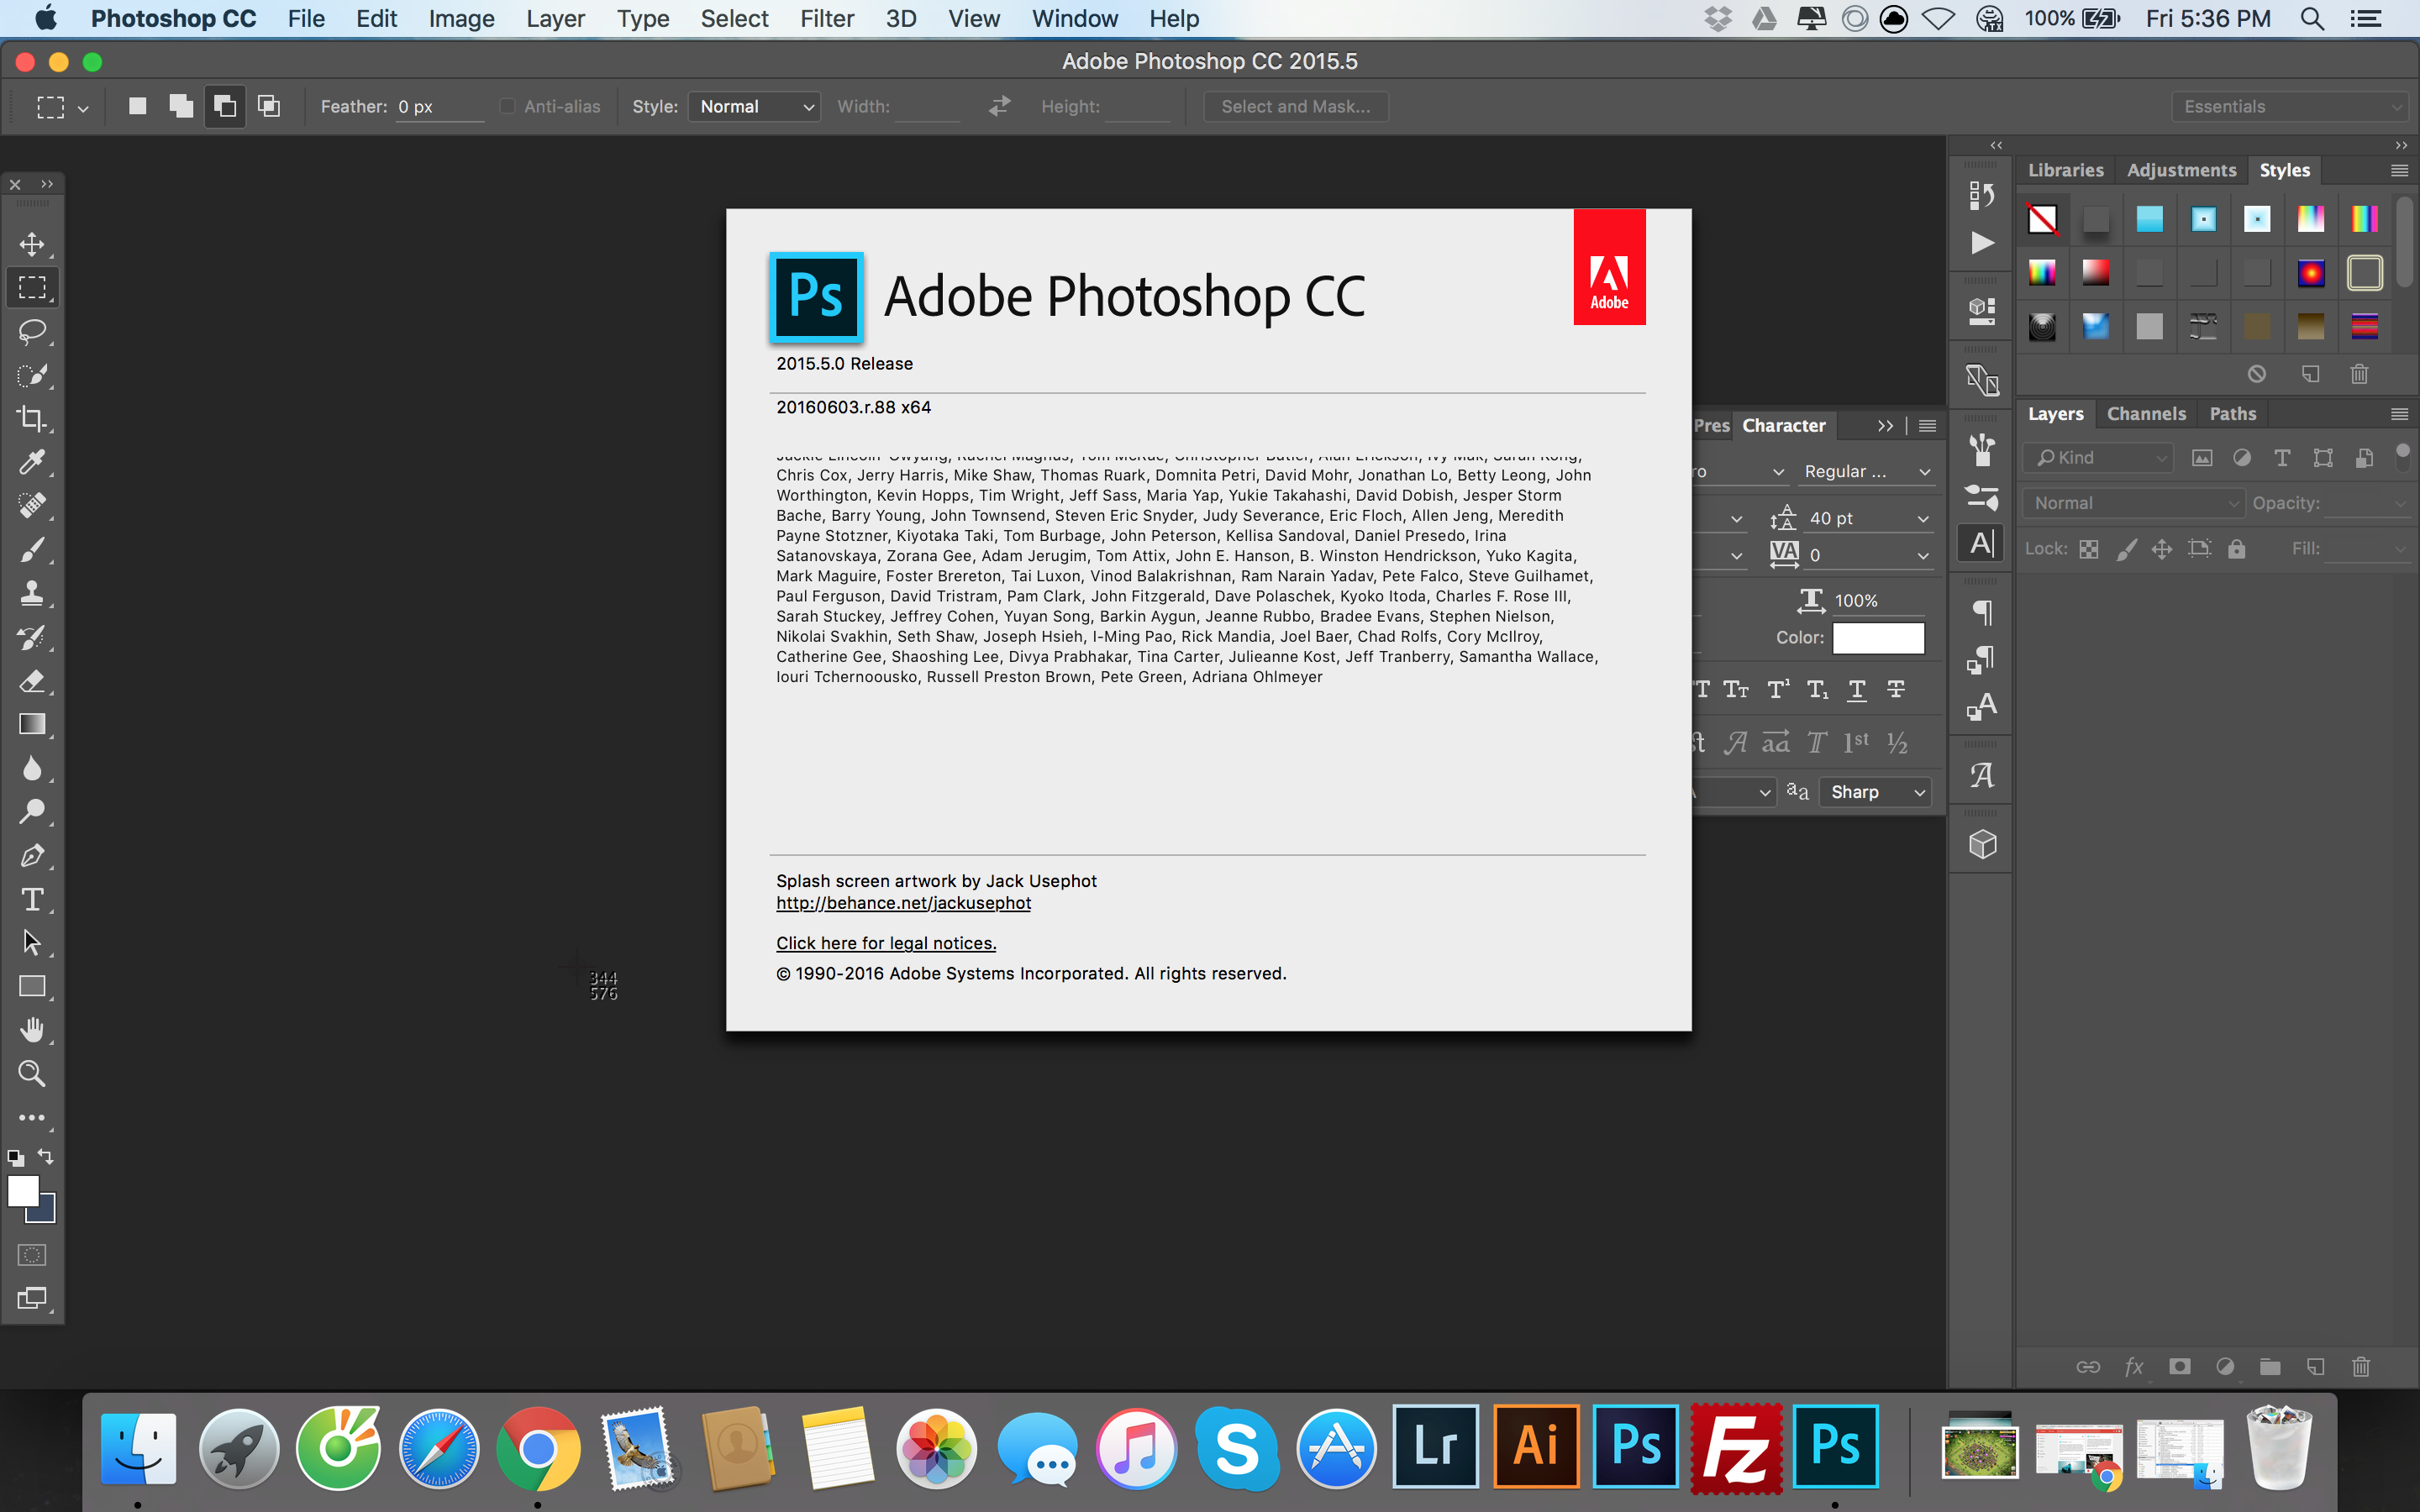 Download Adobe Photoshop cs4 Logo PNG and Vector (PDF, SVG, Ai, EPS) Free